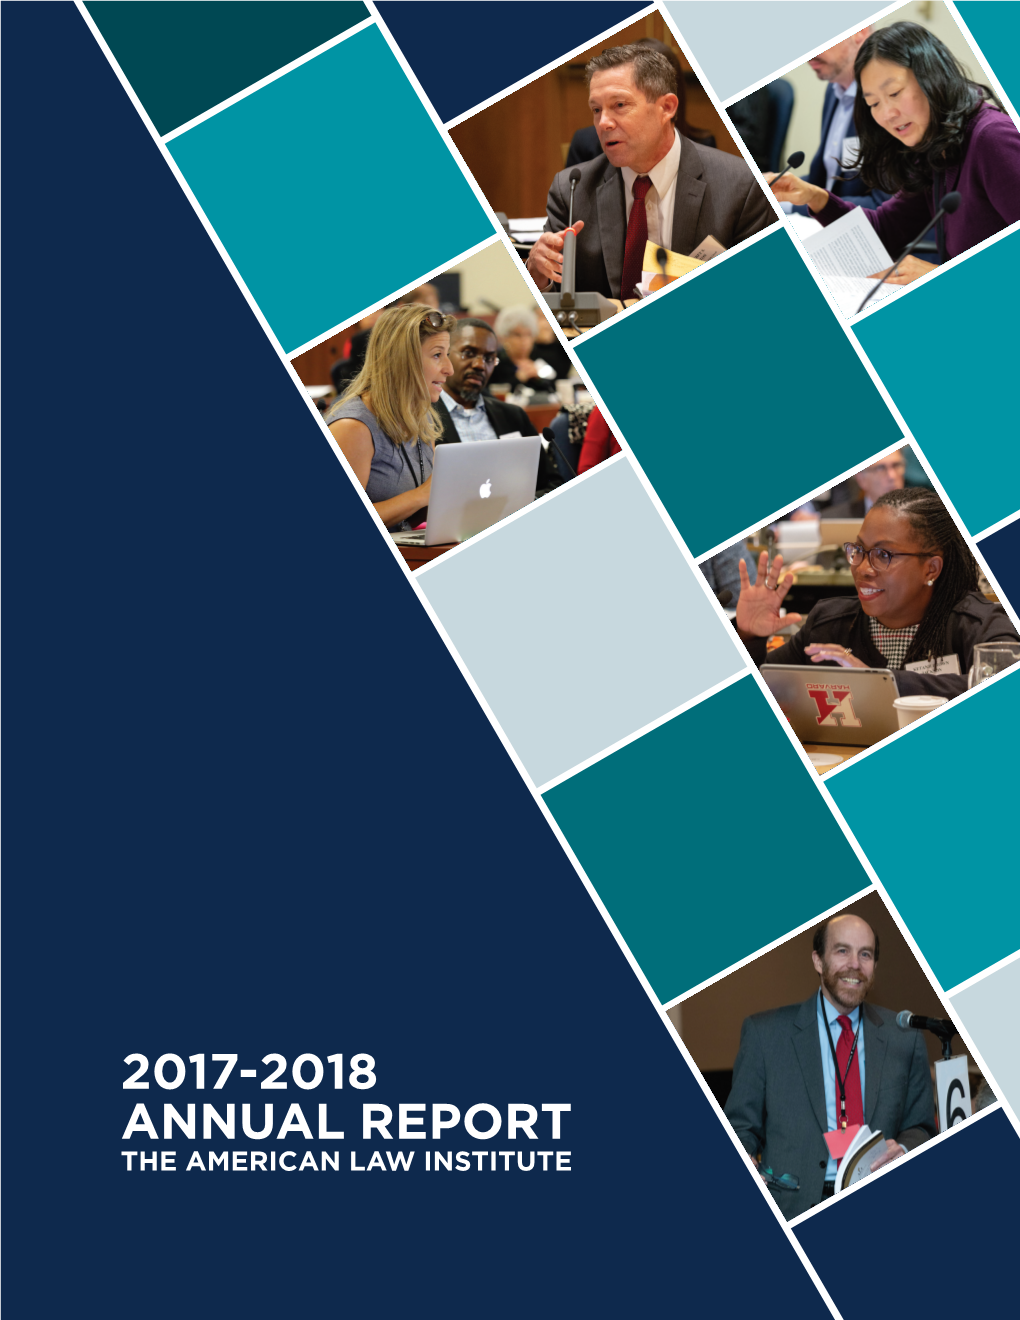 Download the 2017-2018 Annual Report